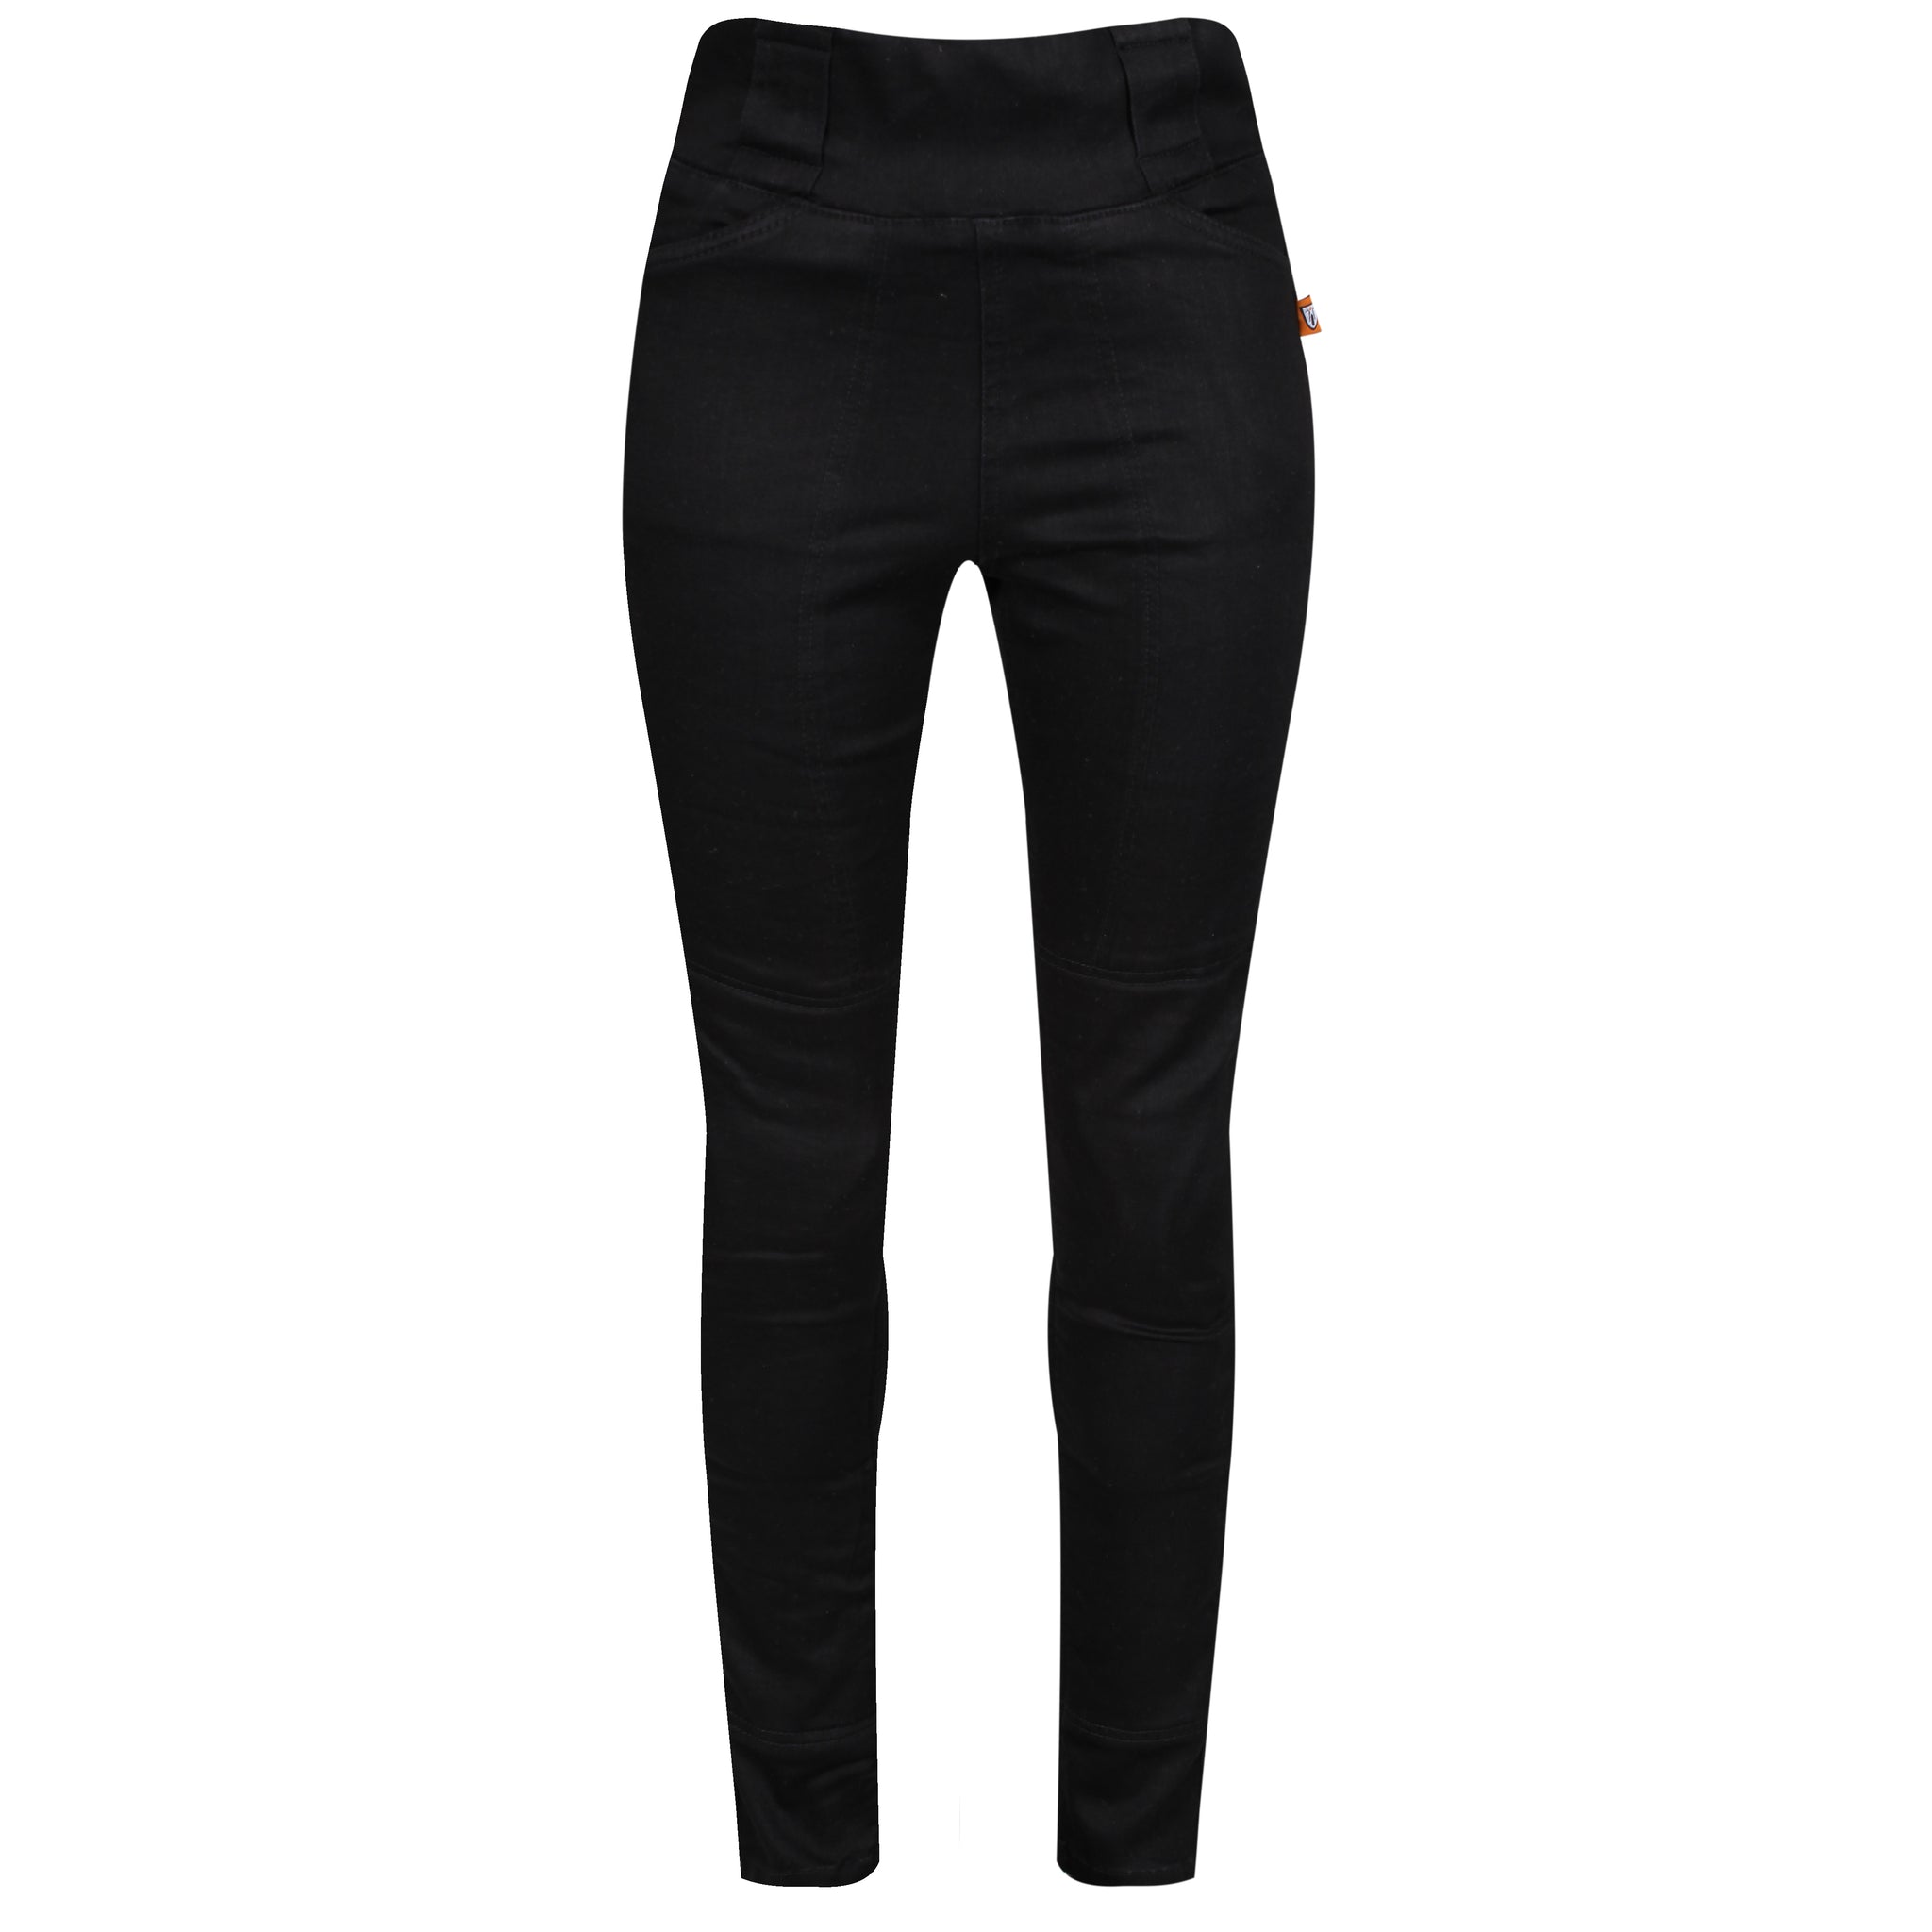 Black women's motorcycle jeggings from Moto girl with high waste from front